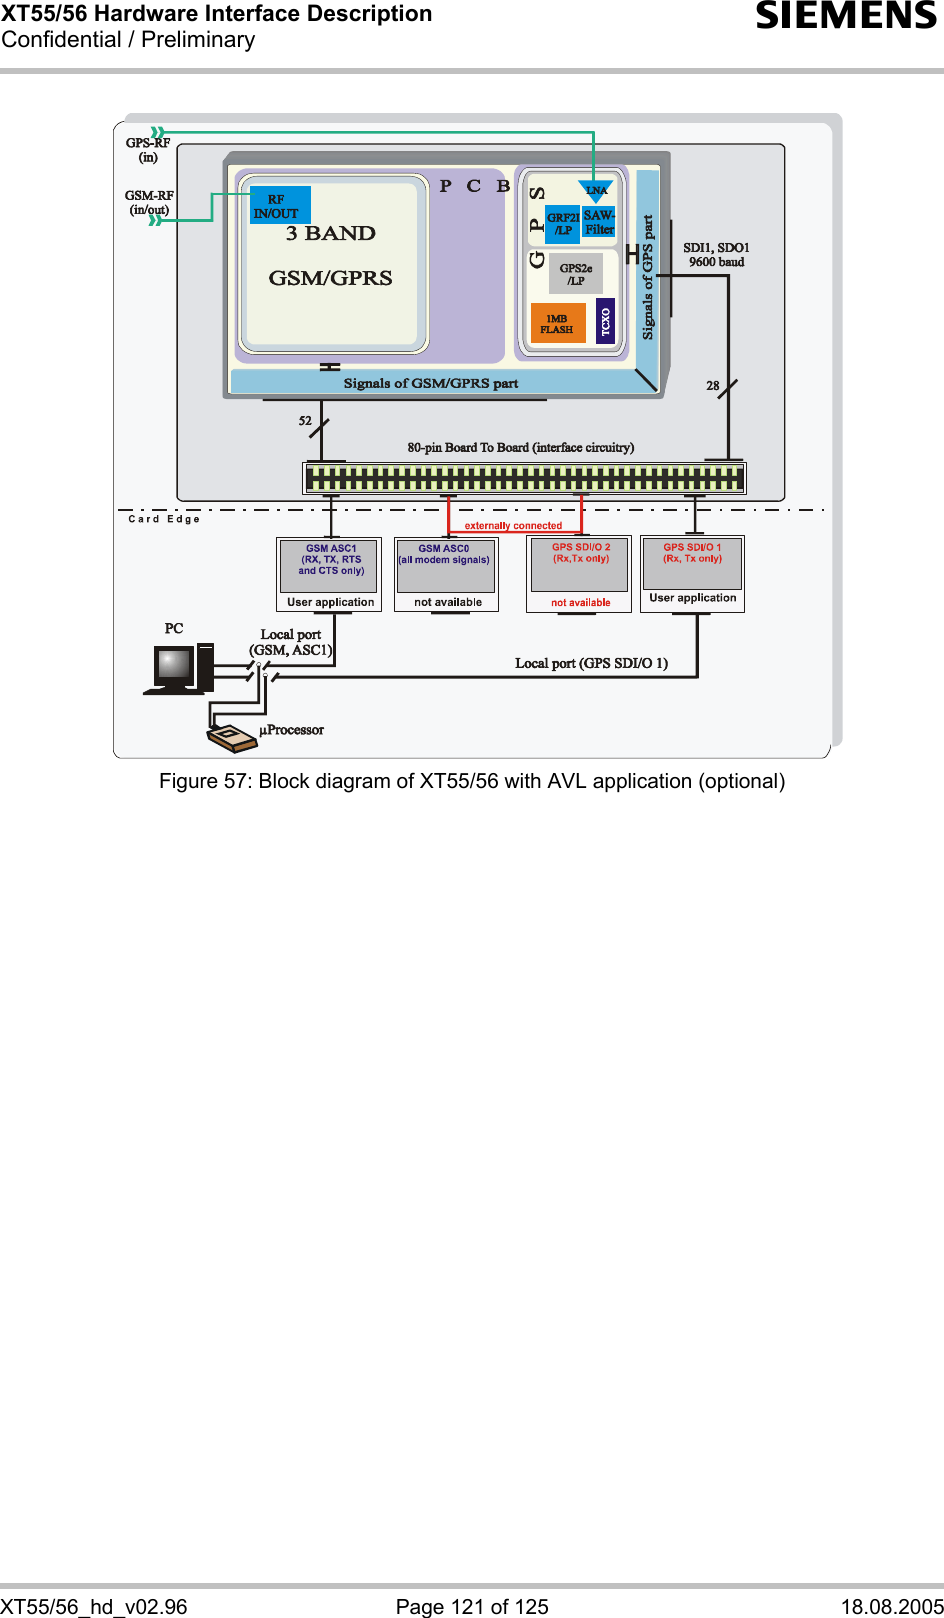 XT55/56 Hardware Interface Description Confidential / Preliminary s XT55/56_hd_v02.96  Page 121 of 125  18.08.2005                          Figure 57: Block diagram of XT55/56 with AVL application (optional) 